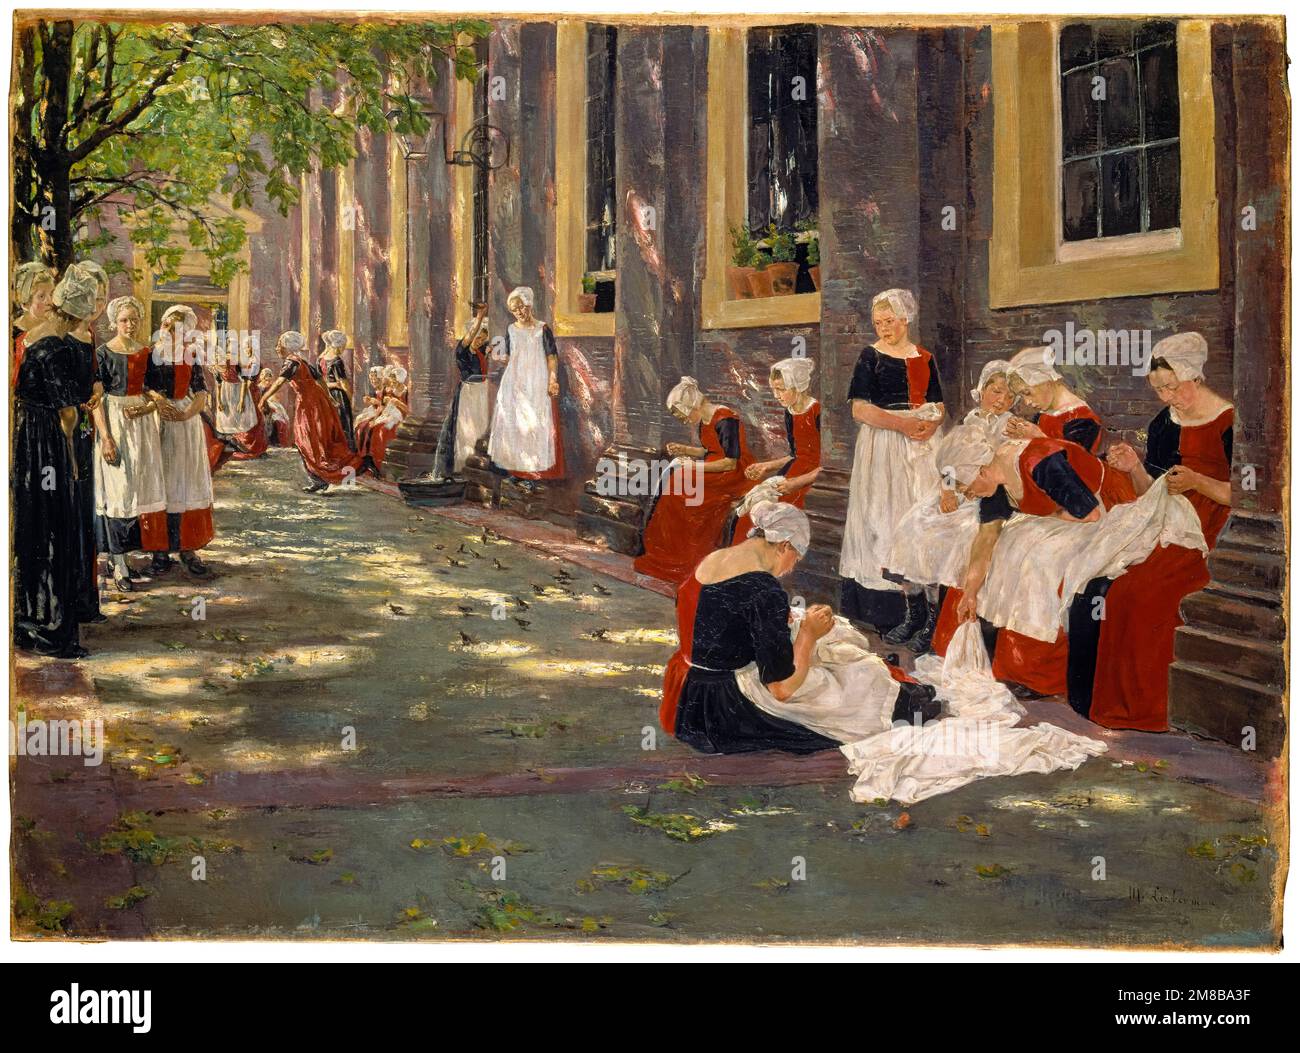 Max Liebermann, The Courtyard of the Orphanage in Amsterdam, Free Period in the Amsterdam Orphanage, painting in oil on canvas, 1881-1882 Stock Photo